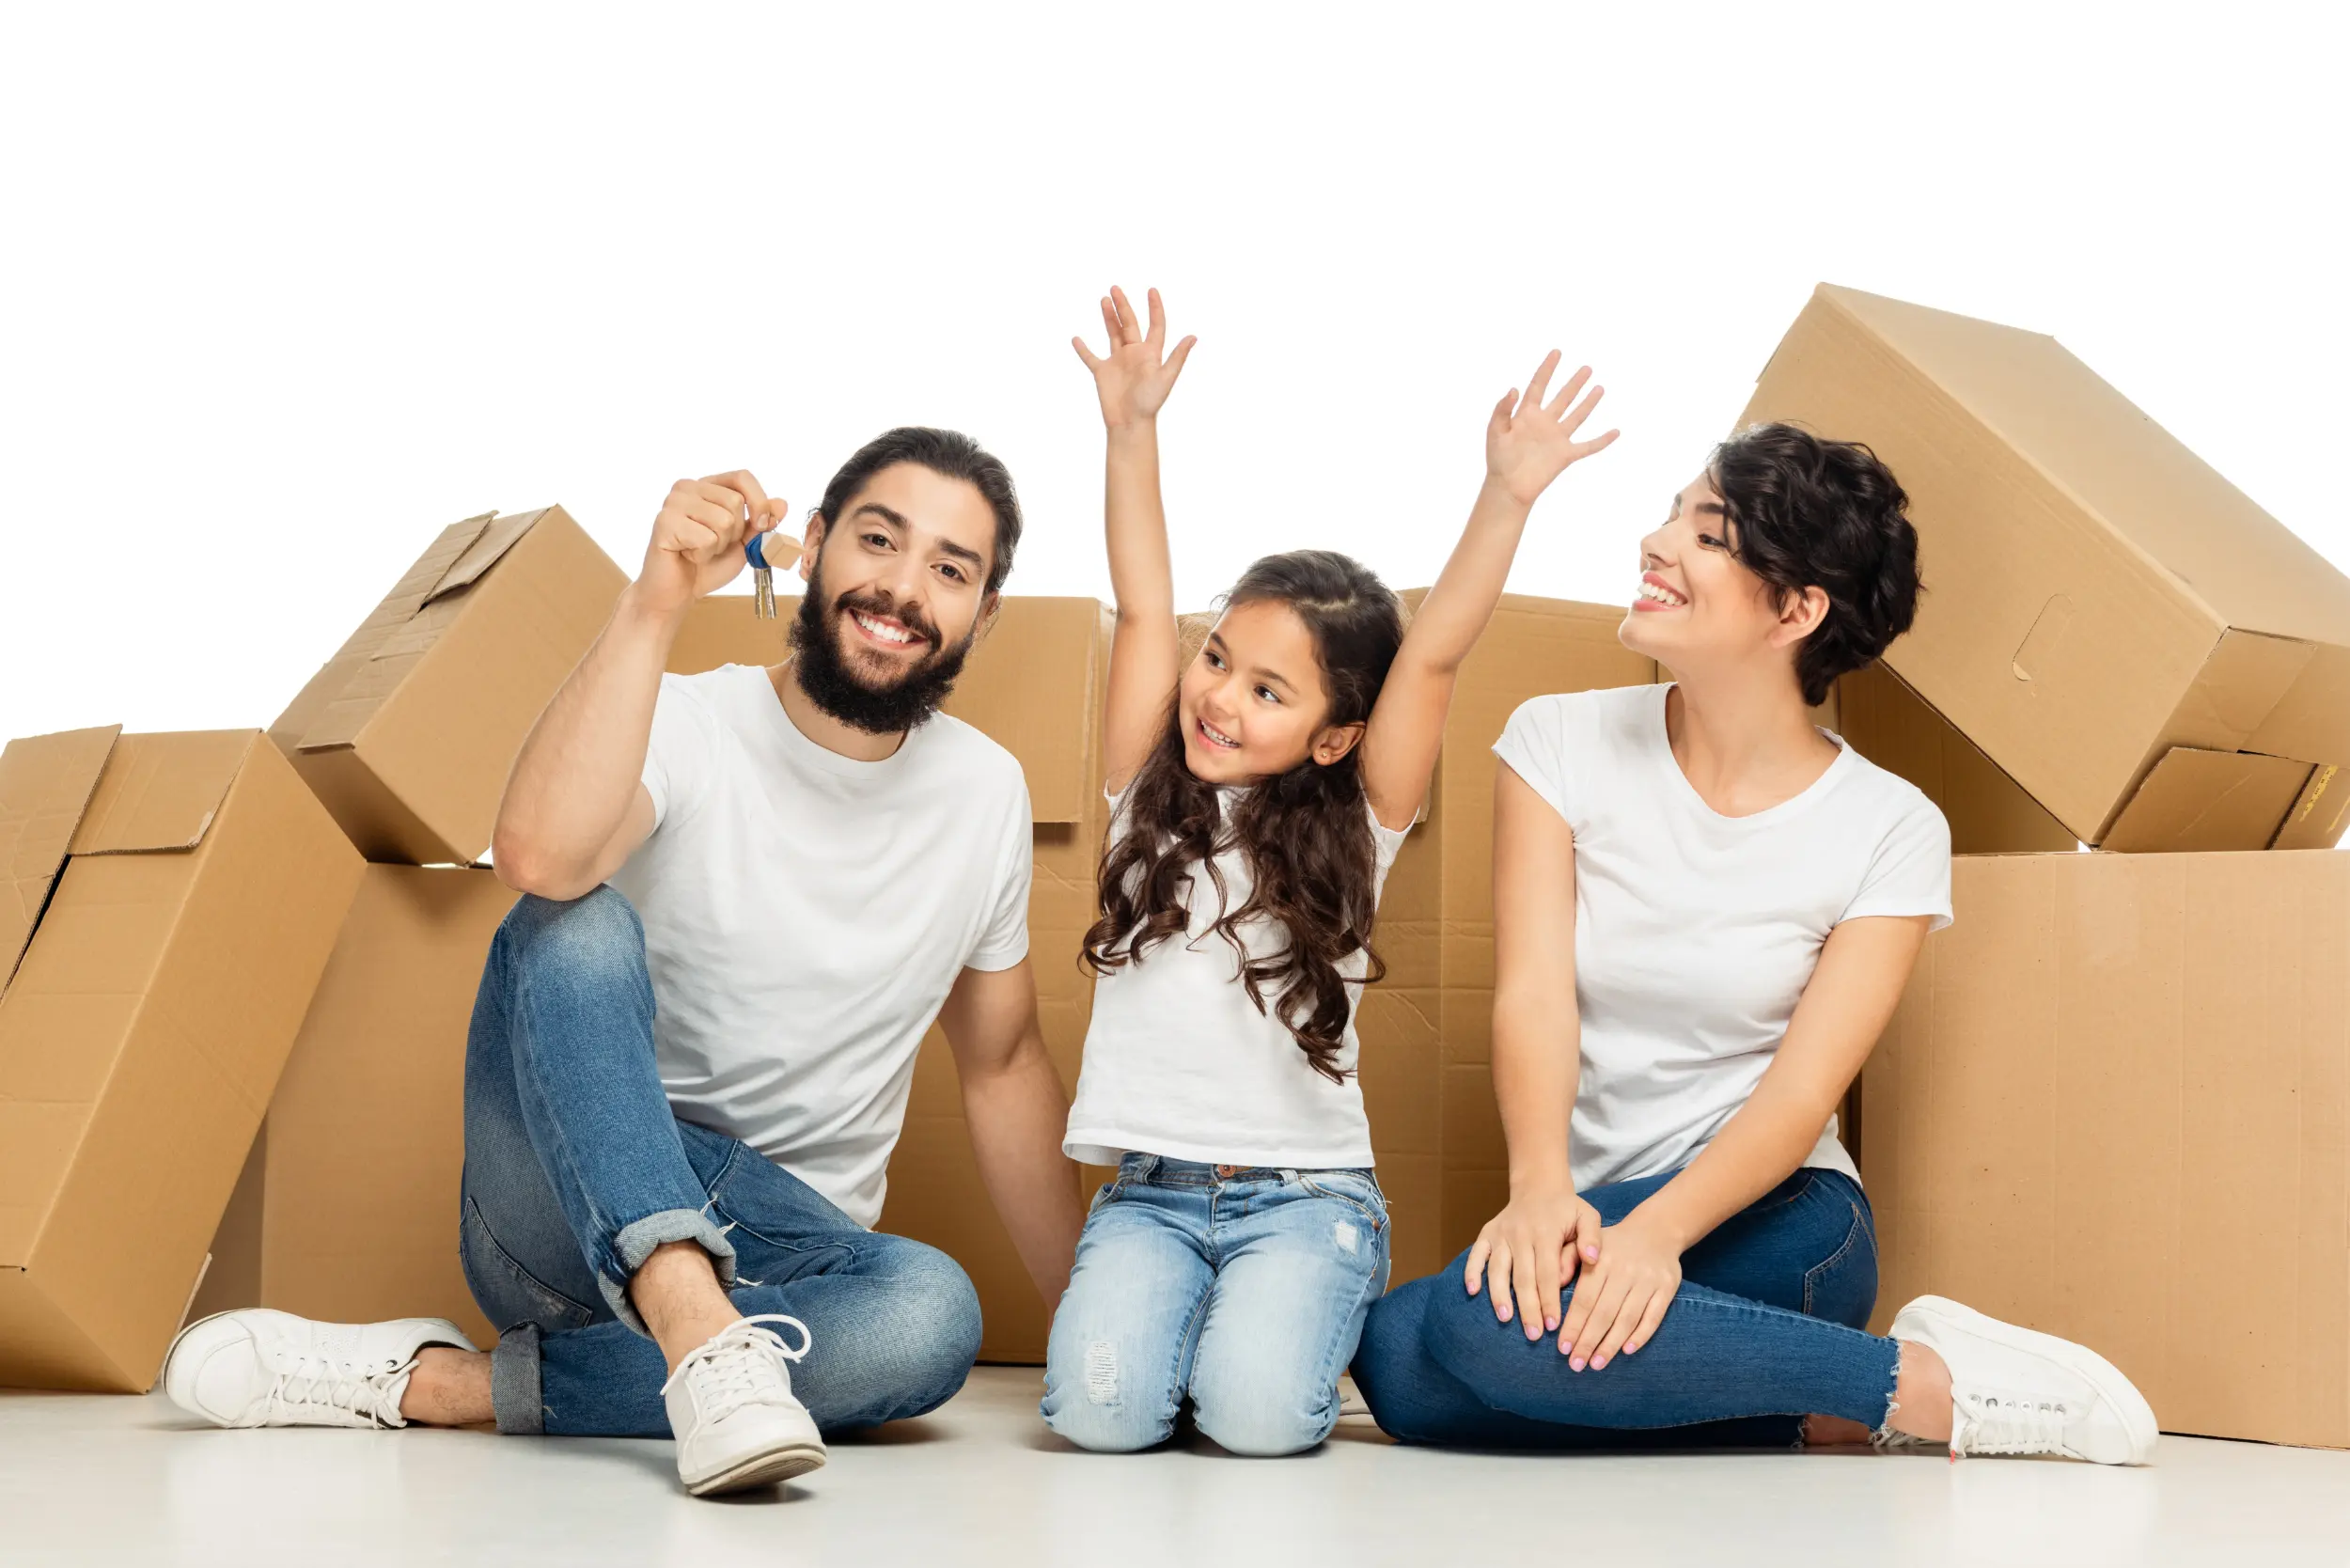 Happy latin kid gesturing while looking at father holding keys and sitting near boxes isolated on white